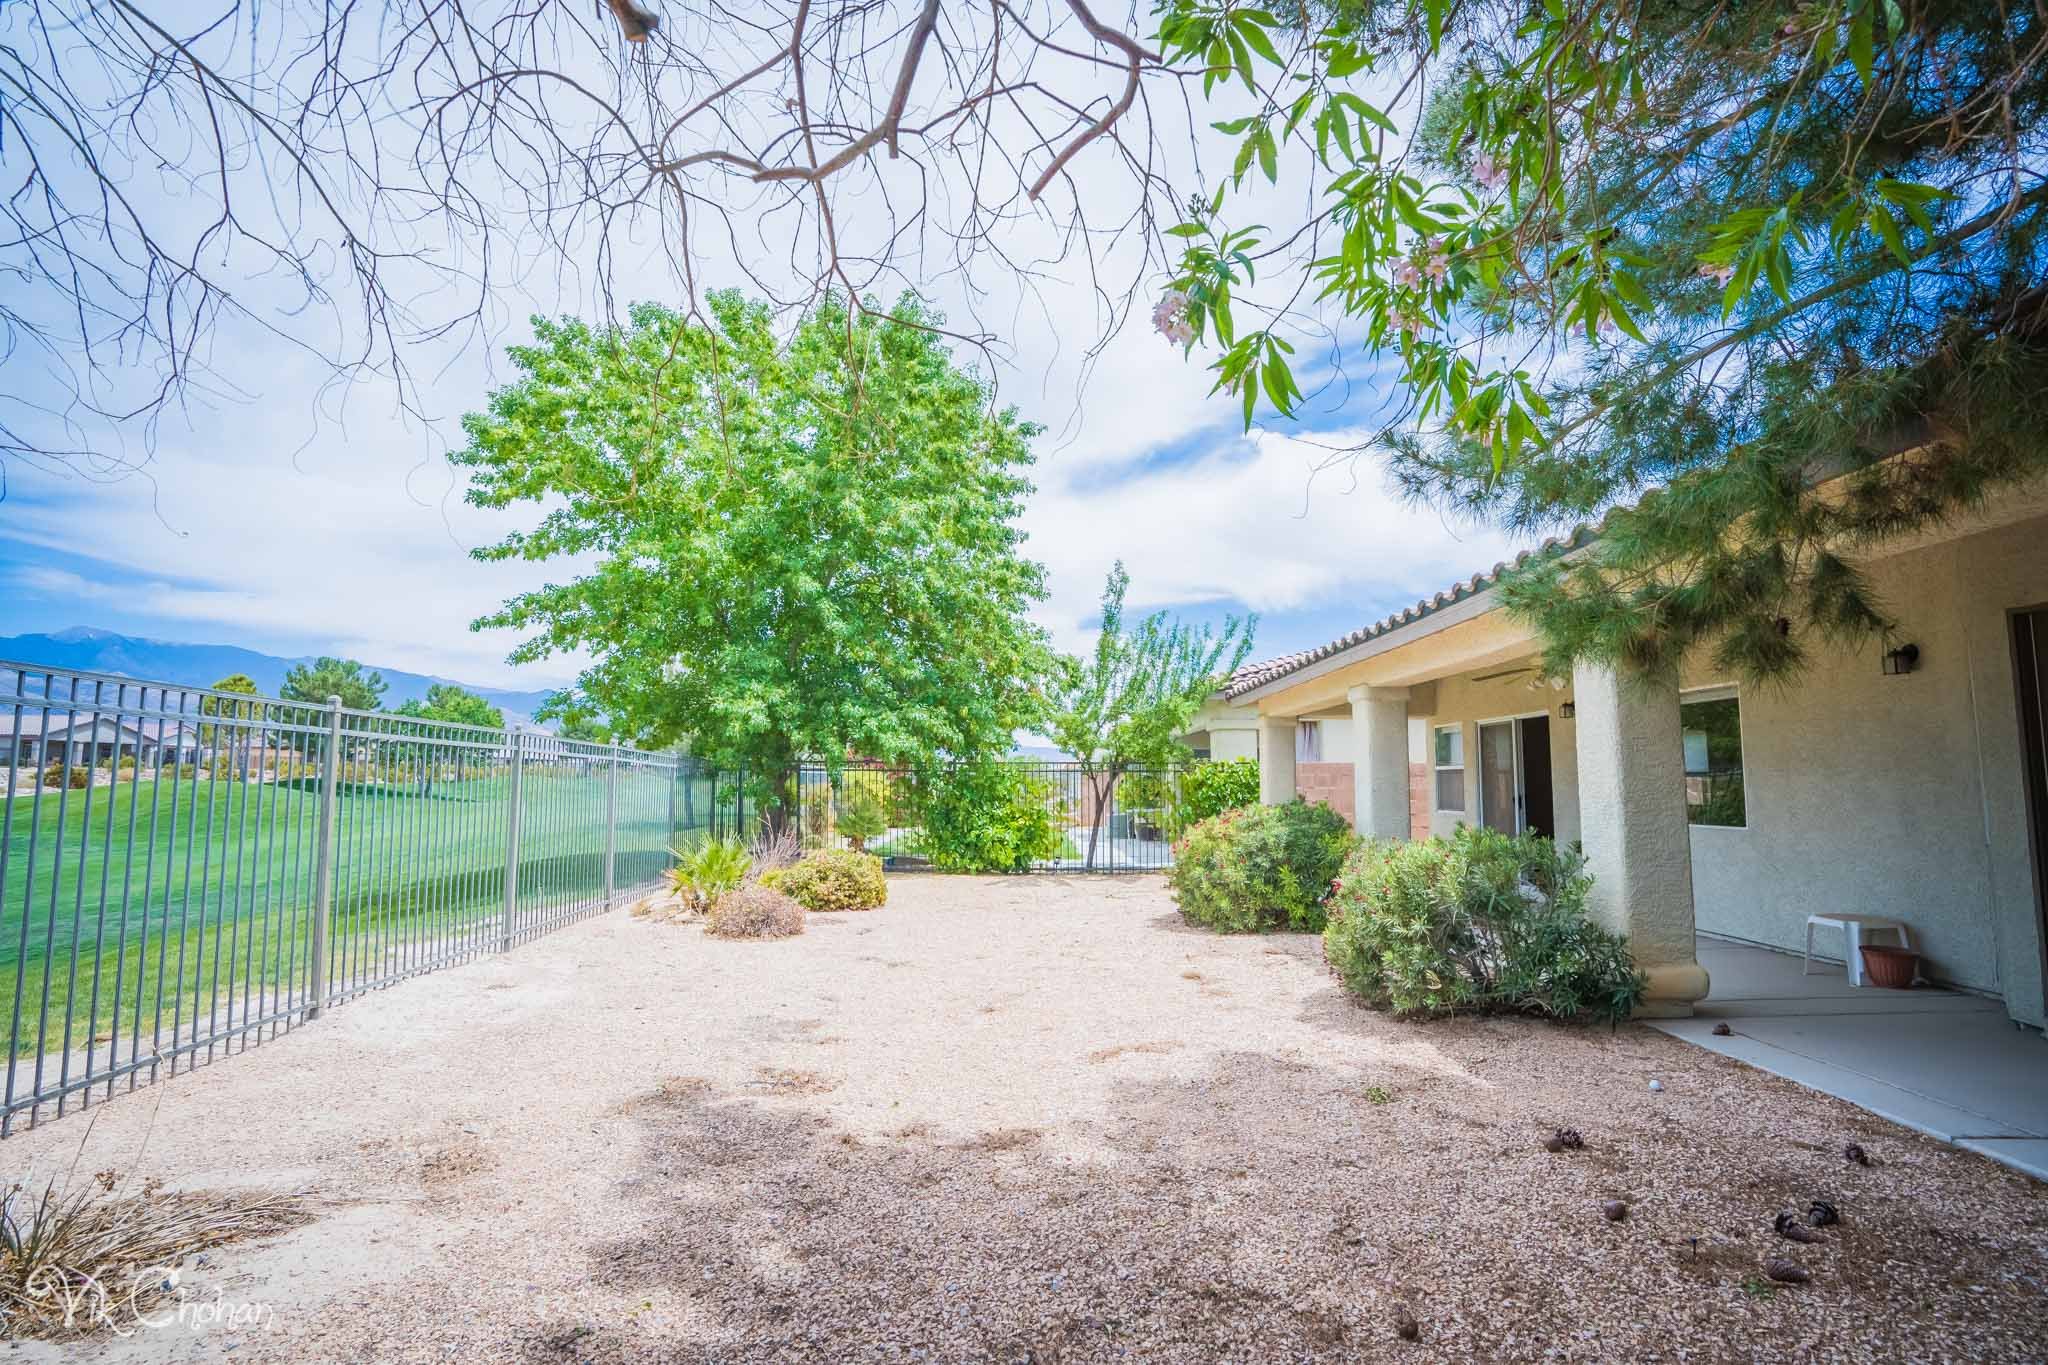 2022-05-15-5378-E-Cansano-St-Pahrump-Real-Estate-Photography-Virtual-Tour-Drone-Photography-Vik-Chohan-Photography-Photo-Booth-Social-Media-VCP-089.jpg